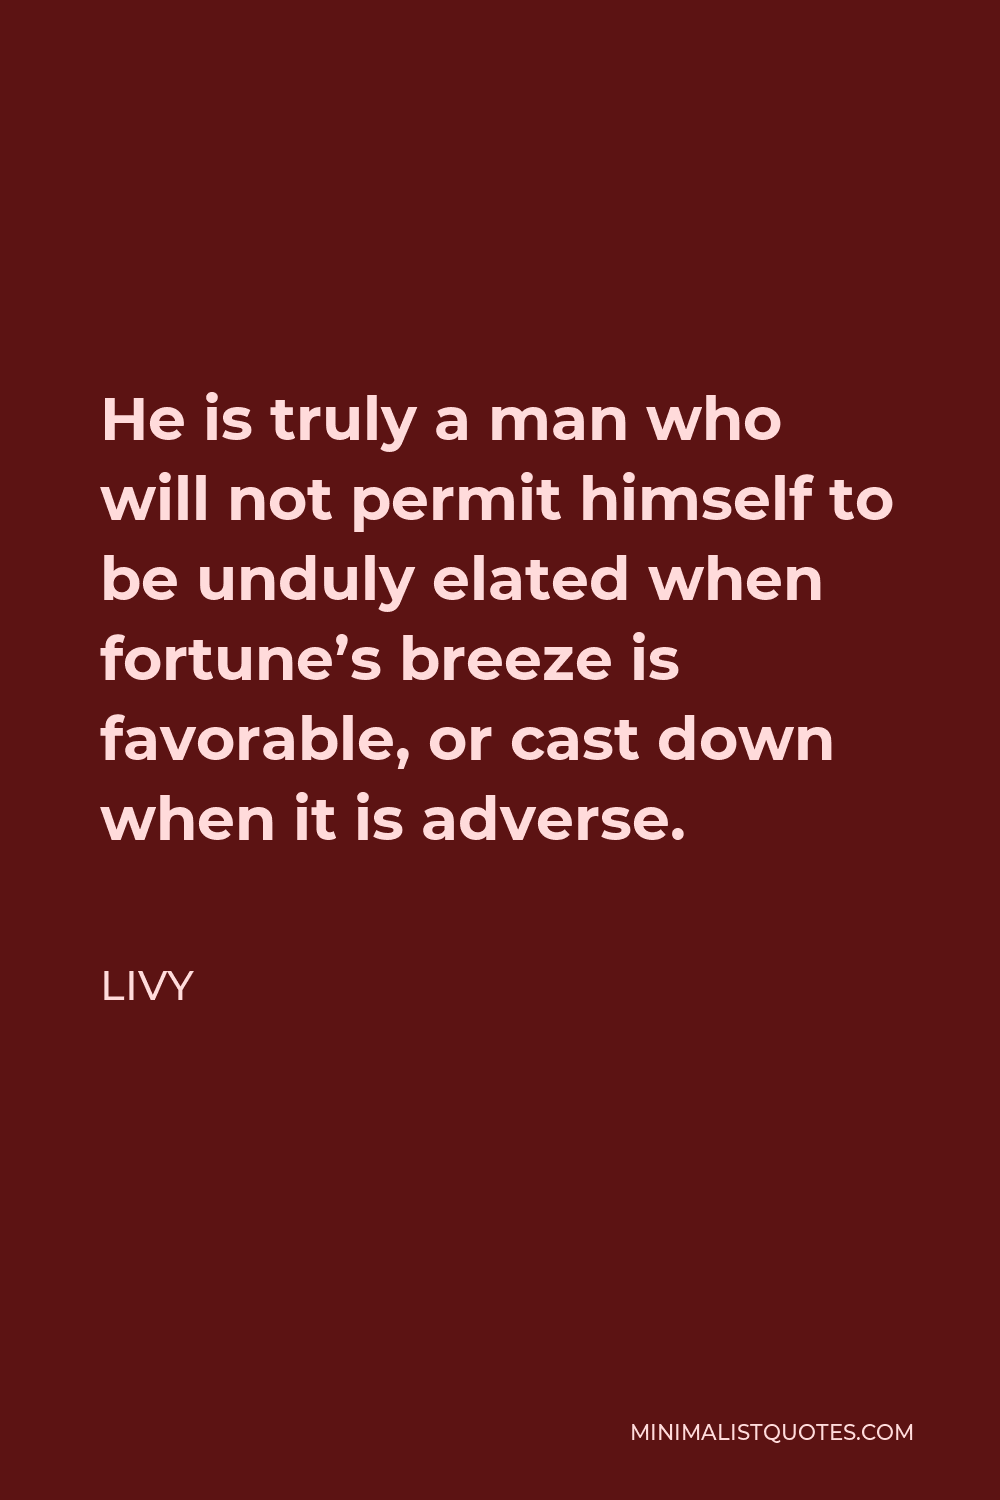 Livy Quote - He is truly a man who will not permit himself to be unduly elated when fortune’s breeze is favorable, or cast down when it is adverse.